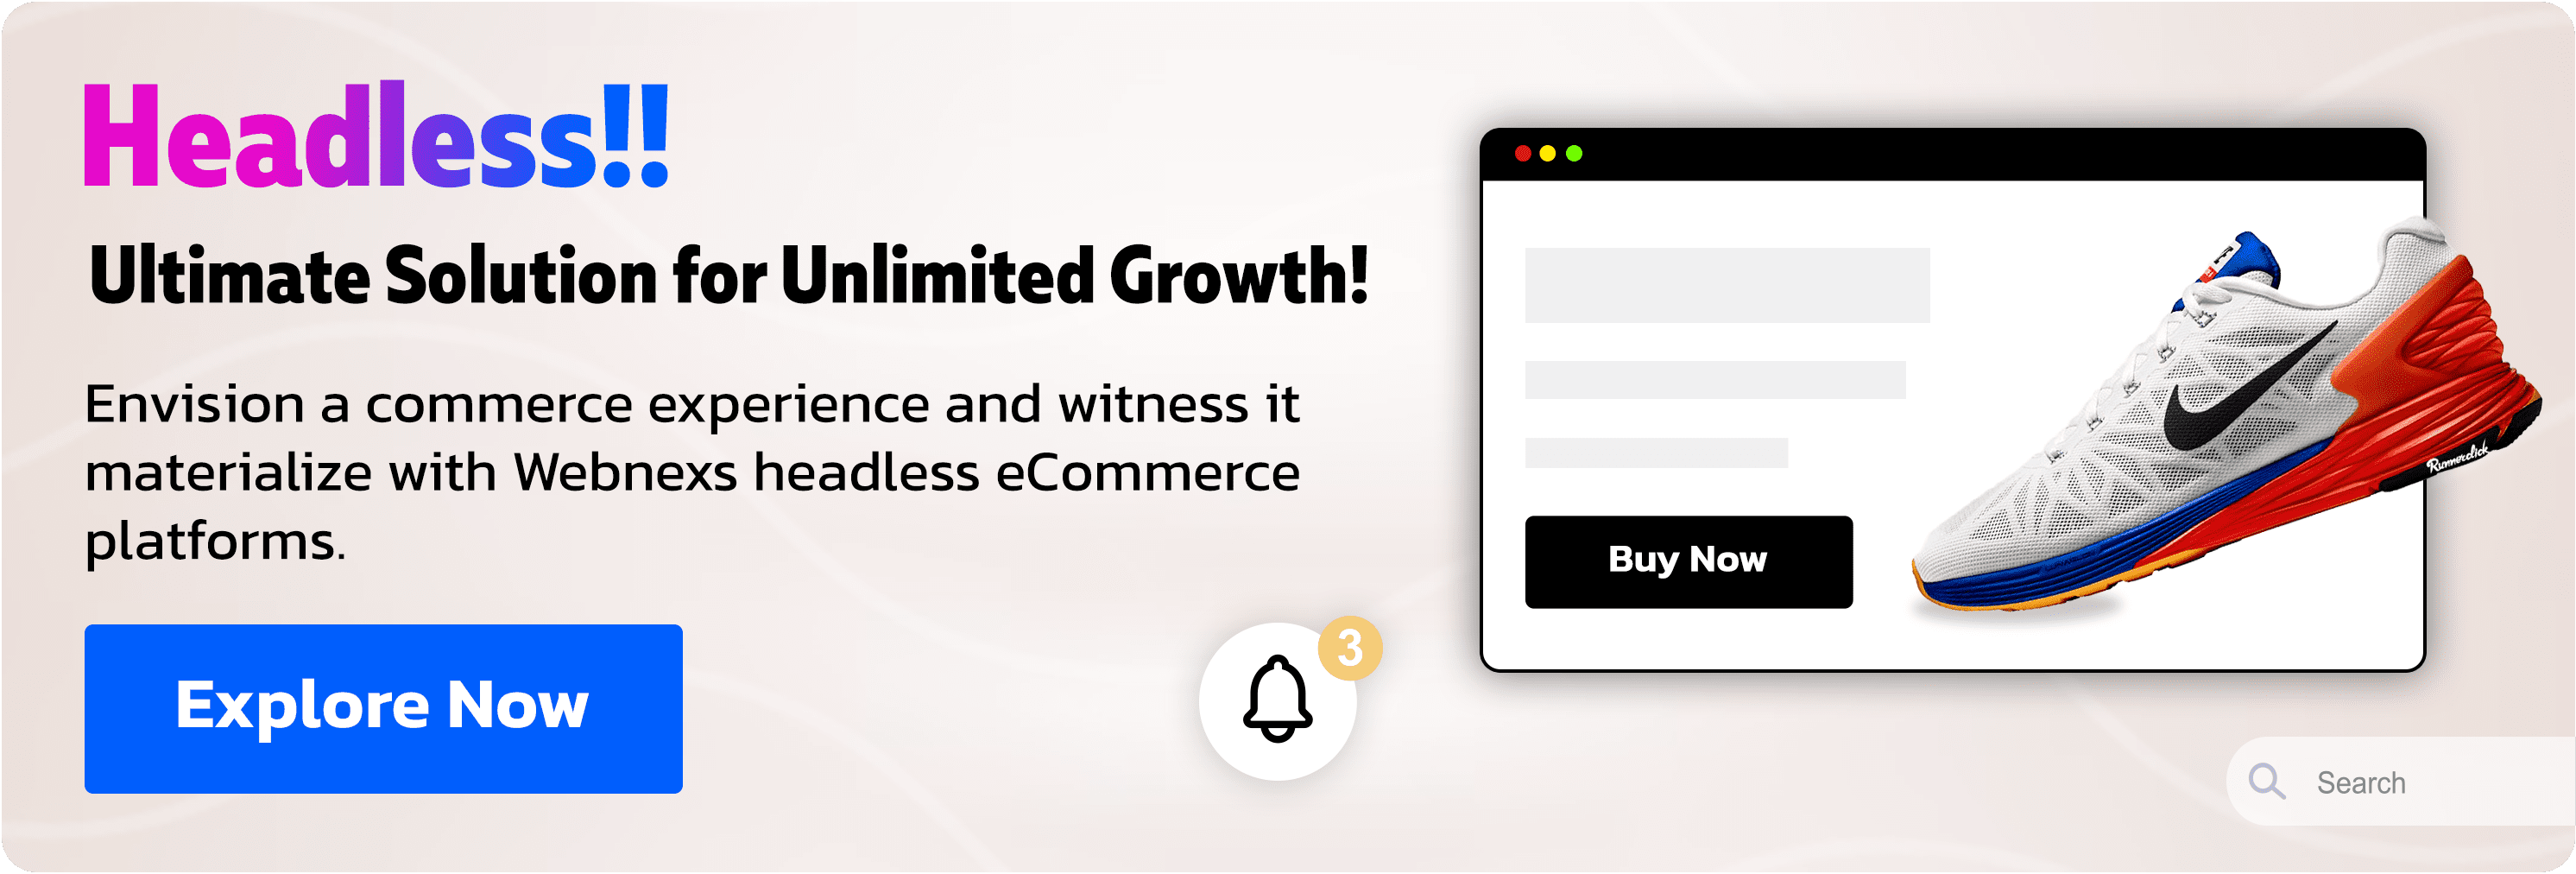 Headless!! Ultimate Solution for unlimited Growth! Envision a commerce experience and witness it materialize with Webnexs headless eCommerce platforms. Explore Now